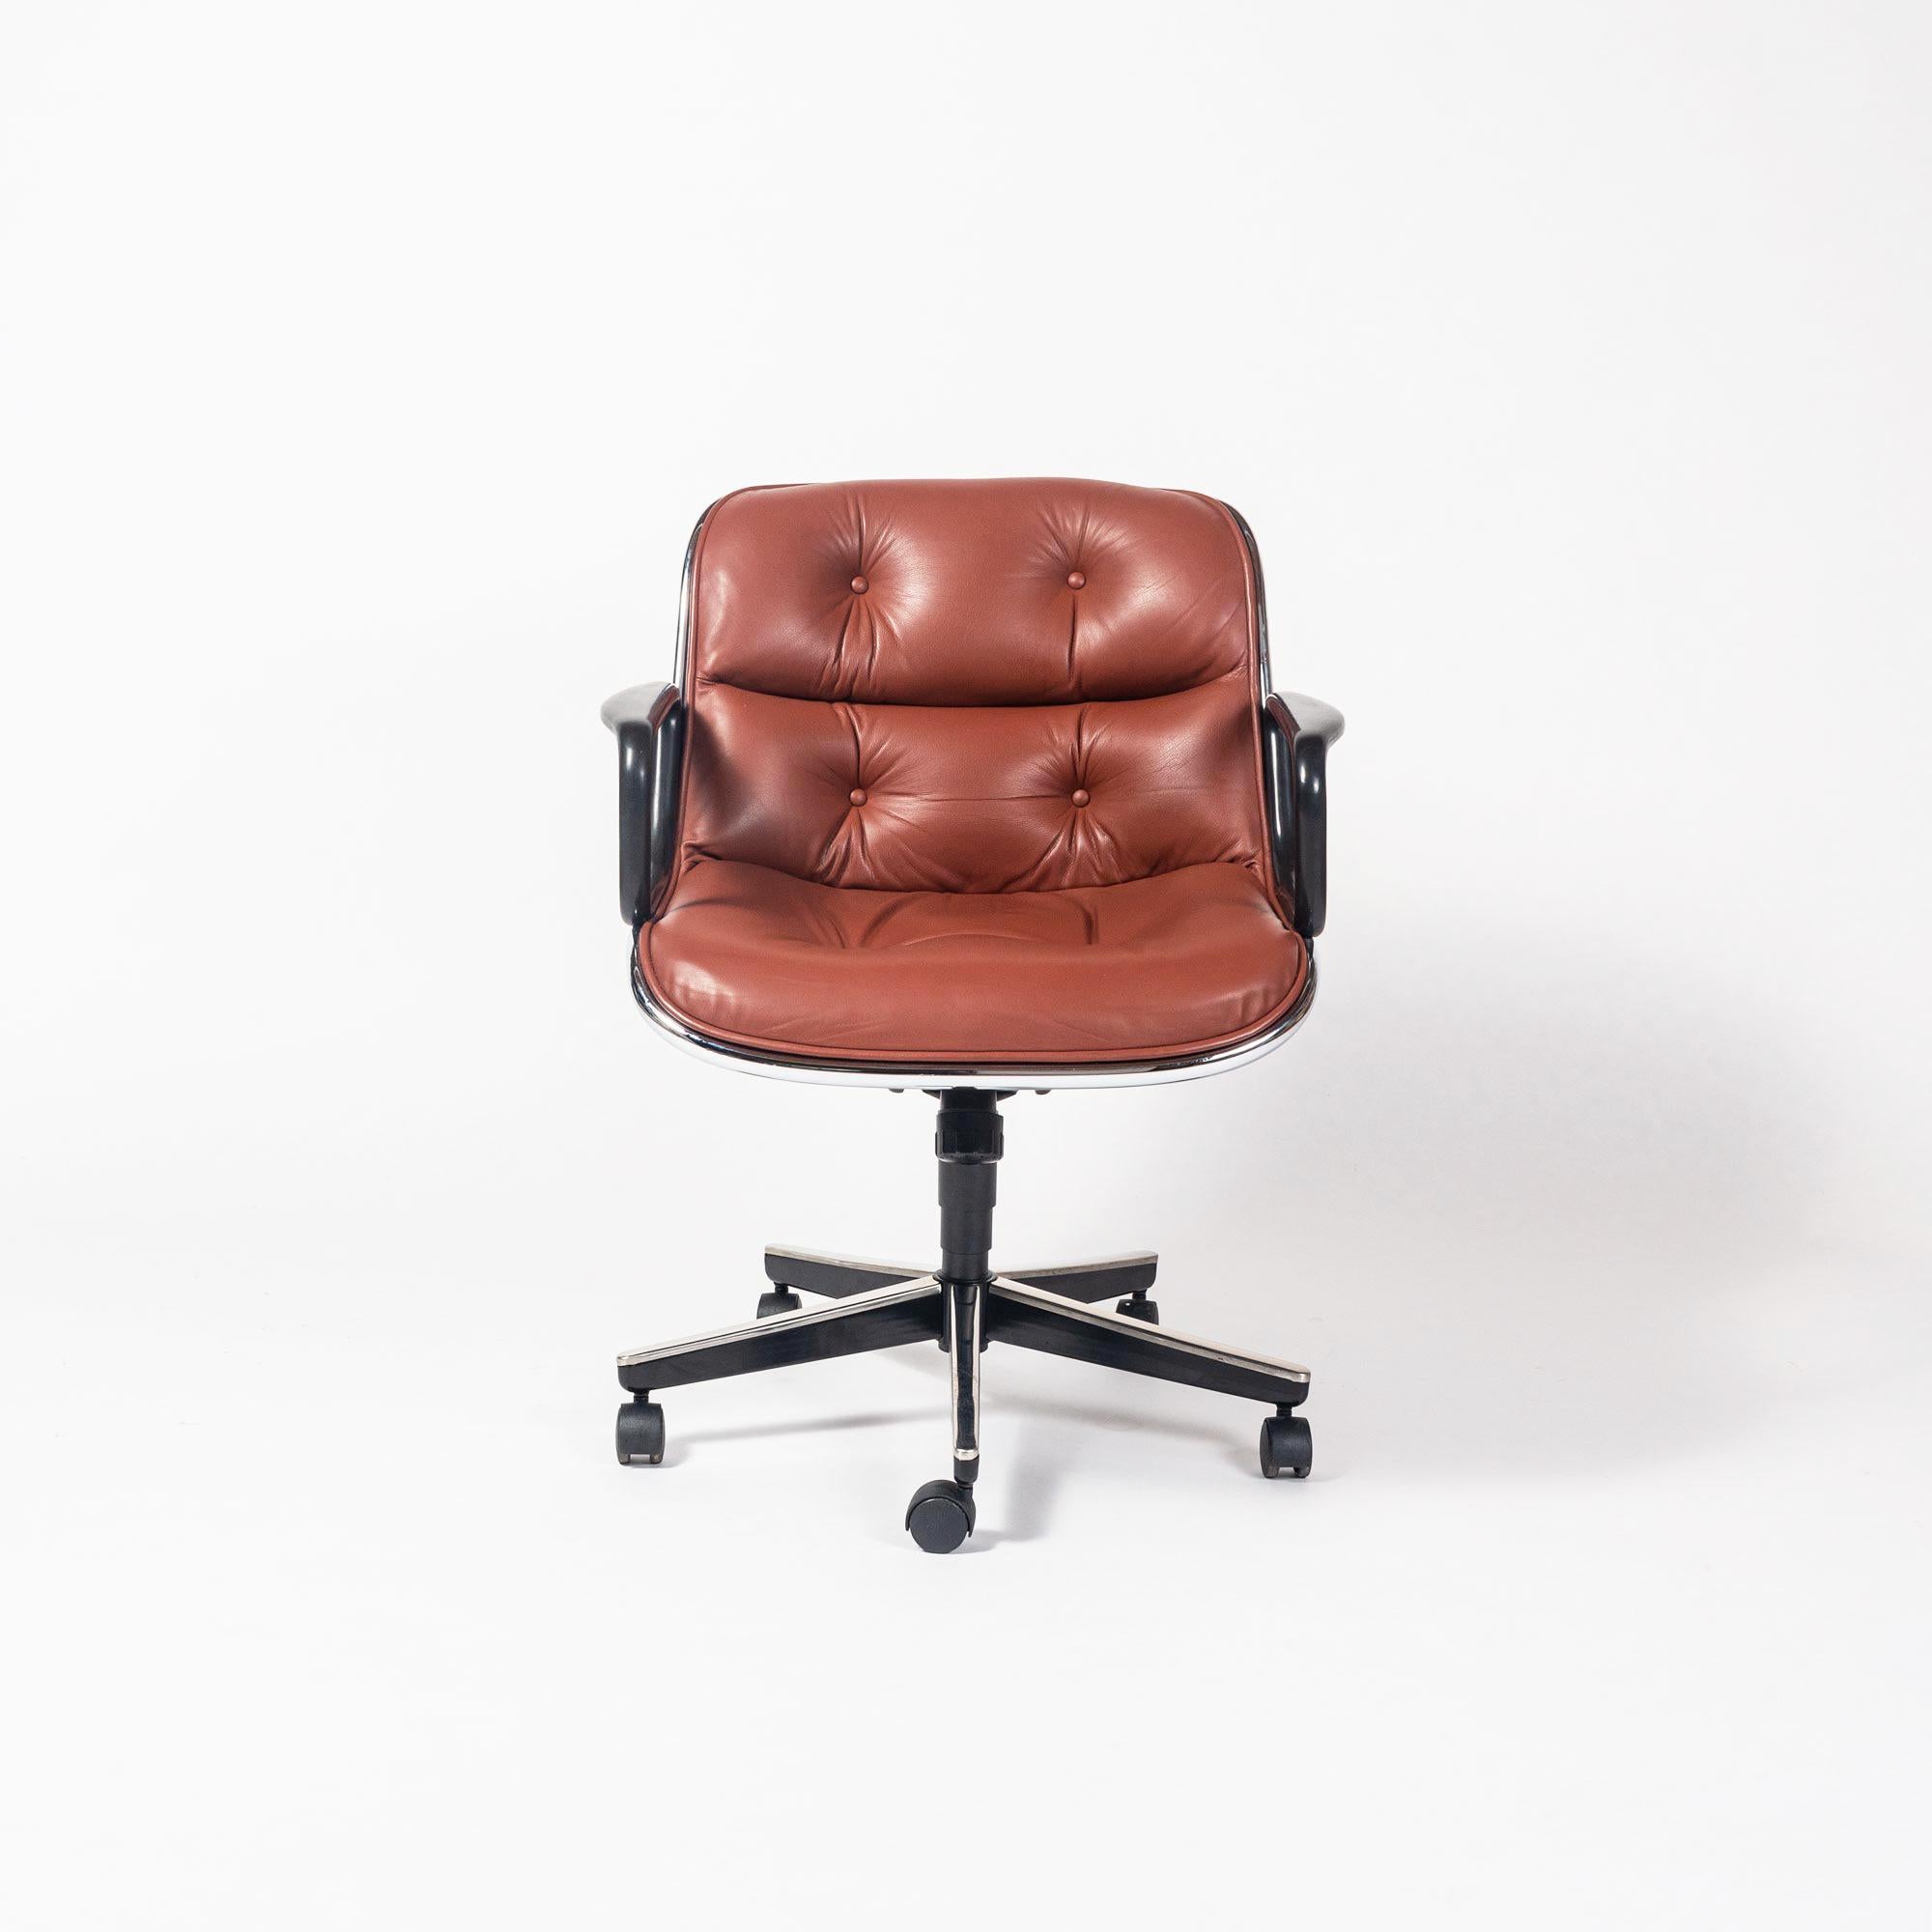 Designed in 1963 and have been in constant production since, this Charles Pollock for Knoll mid century wheeled office desk chair with black wheel base, hard casters and upgraded Sabrina leather in Pumpkin color is in pristine condition. The leather